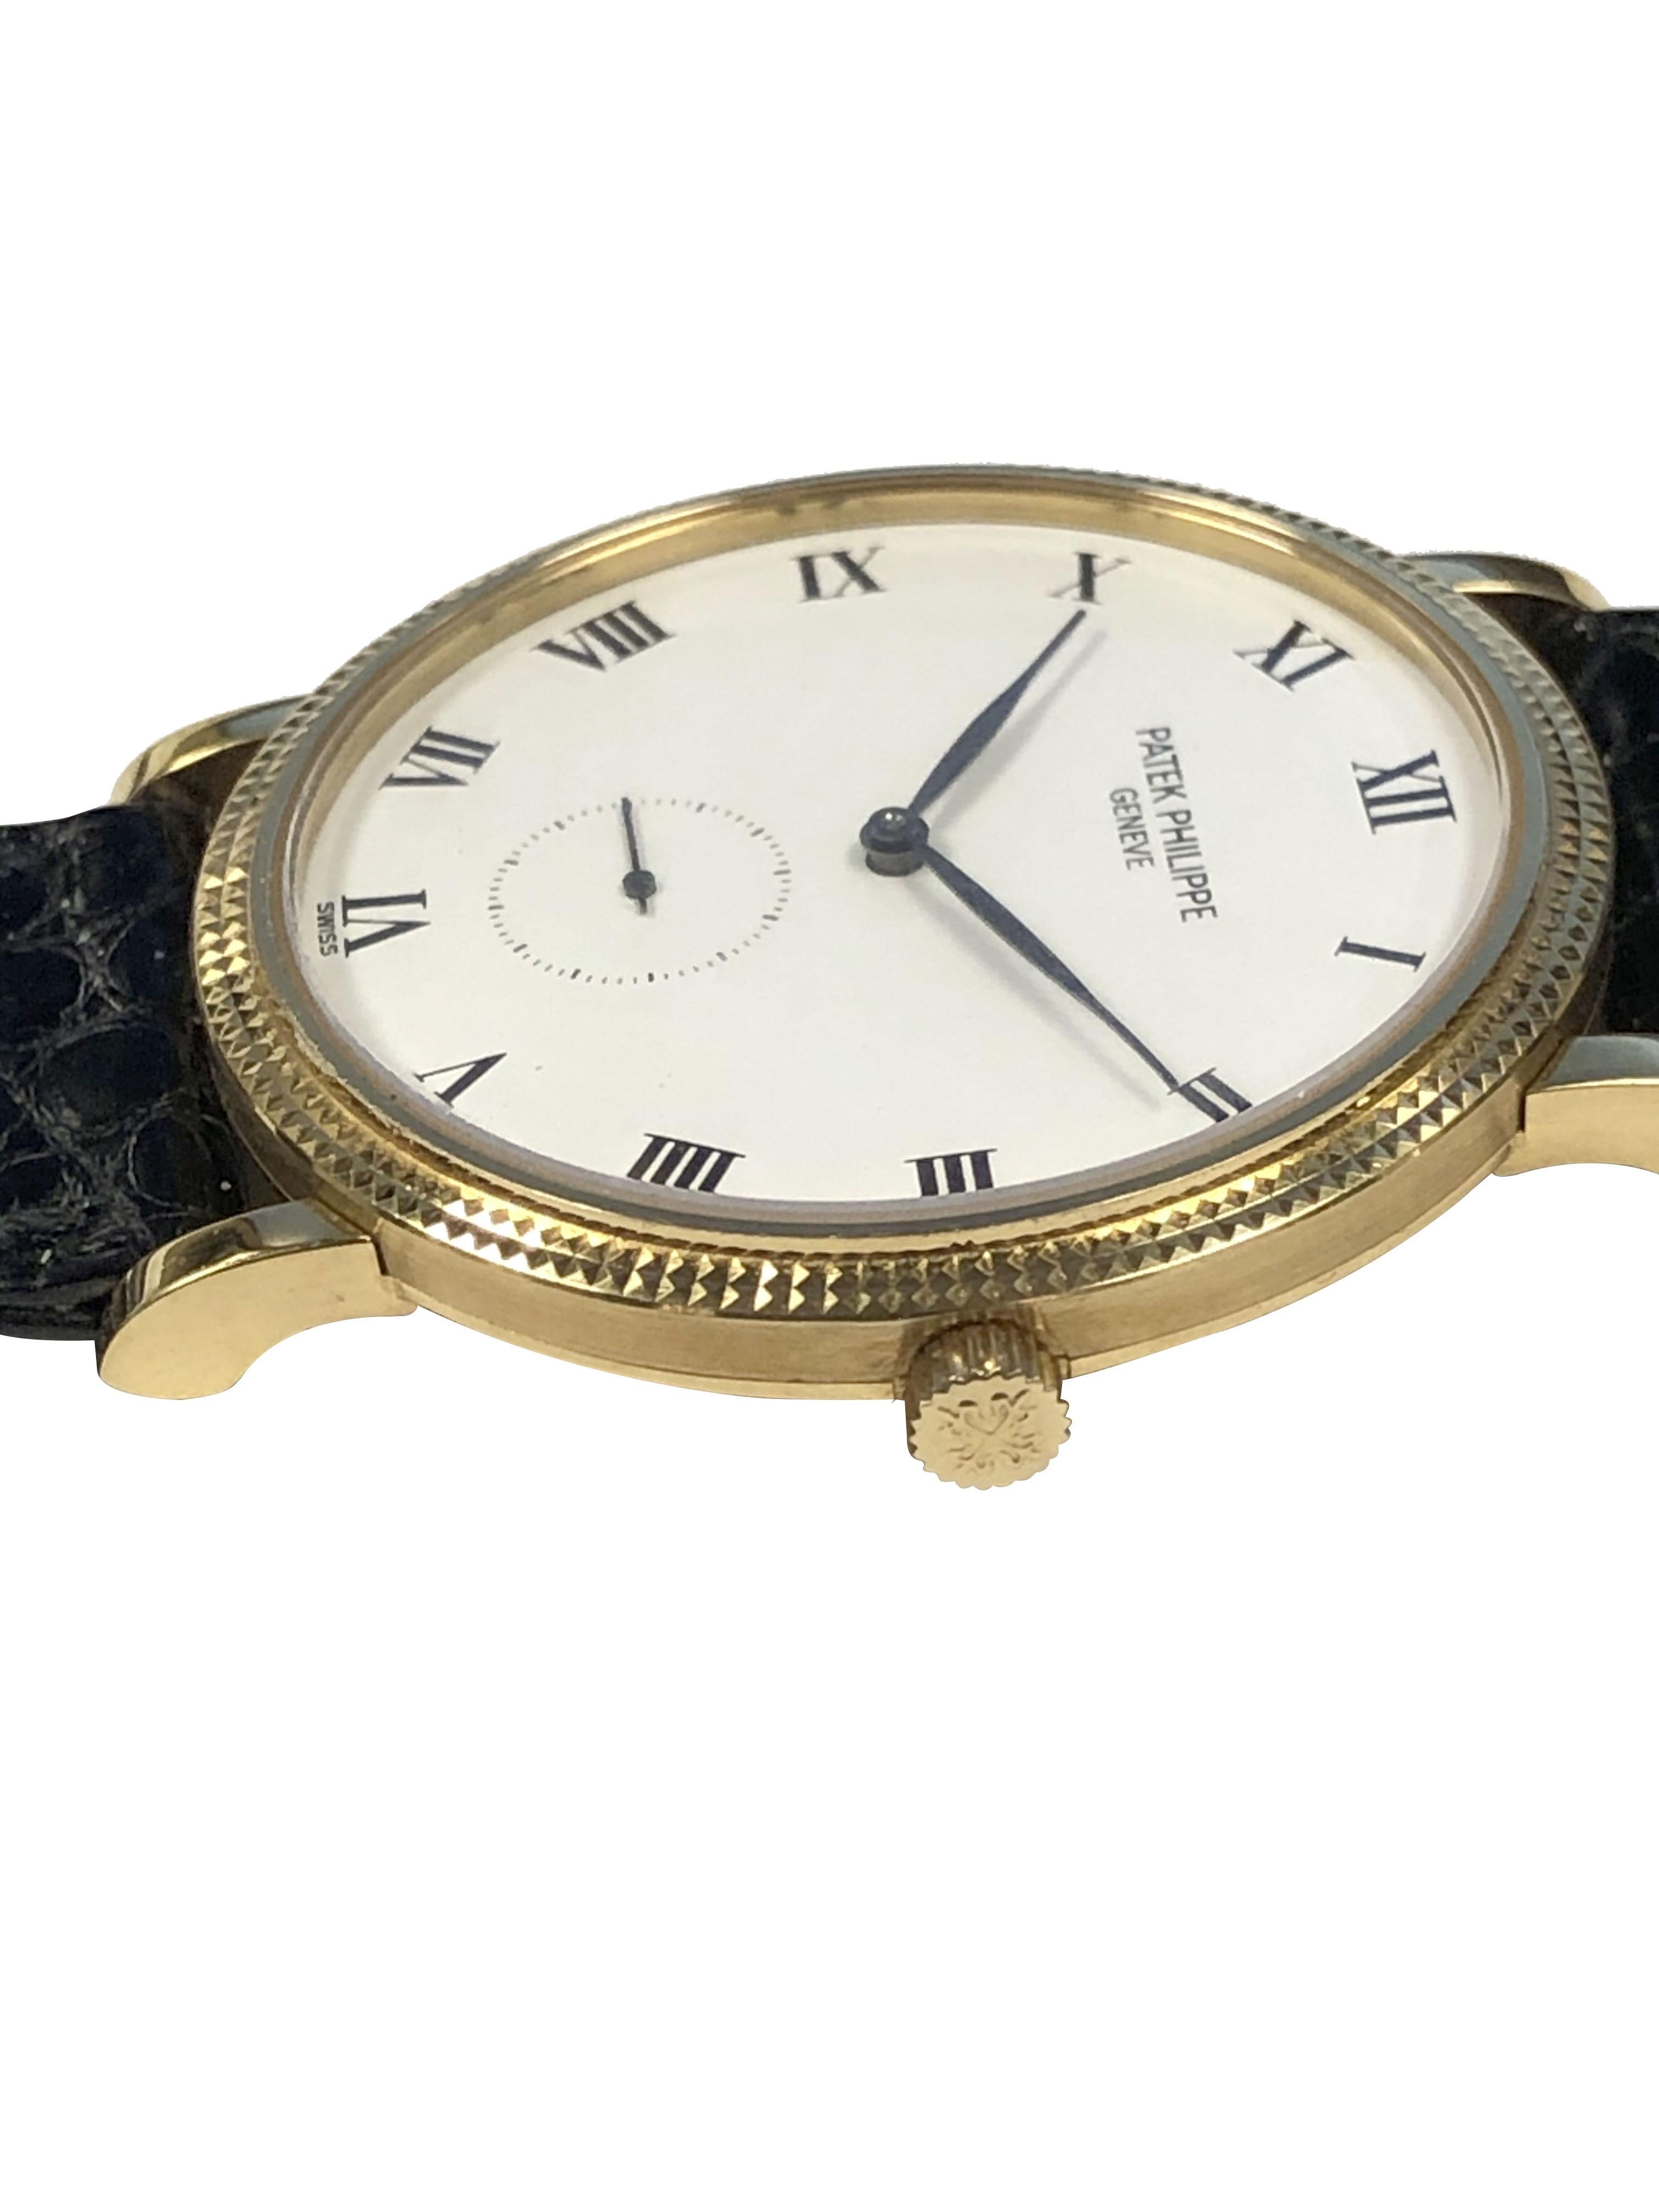 Circa 1996 Patek Philippe Calatrava reference 3919 Wrist Watch, 33 M.M. 18k Yellow Gold 2 piece case with Hobnail bezel. Caliber 215 18 Jewel Mechanical, Manual wind movement. White Enamel Dial with Black Roman Numerals and a sub seconds hand.